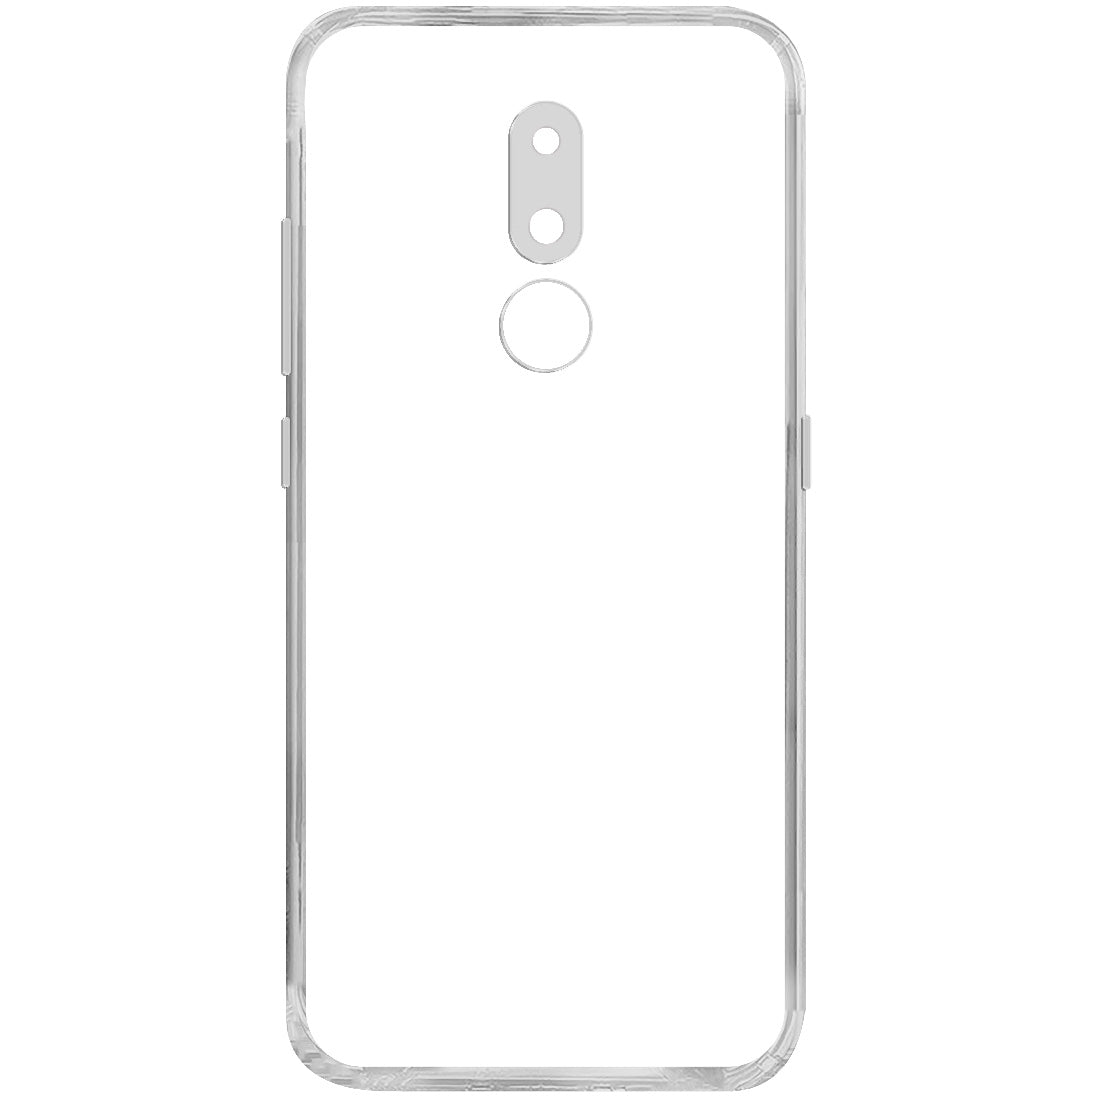 Clear Case for Nokia C3